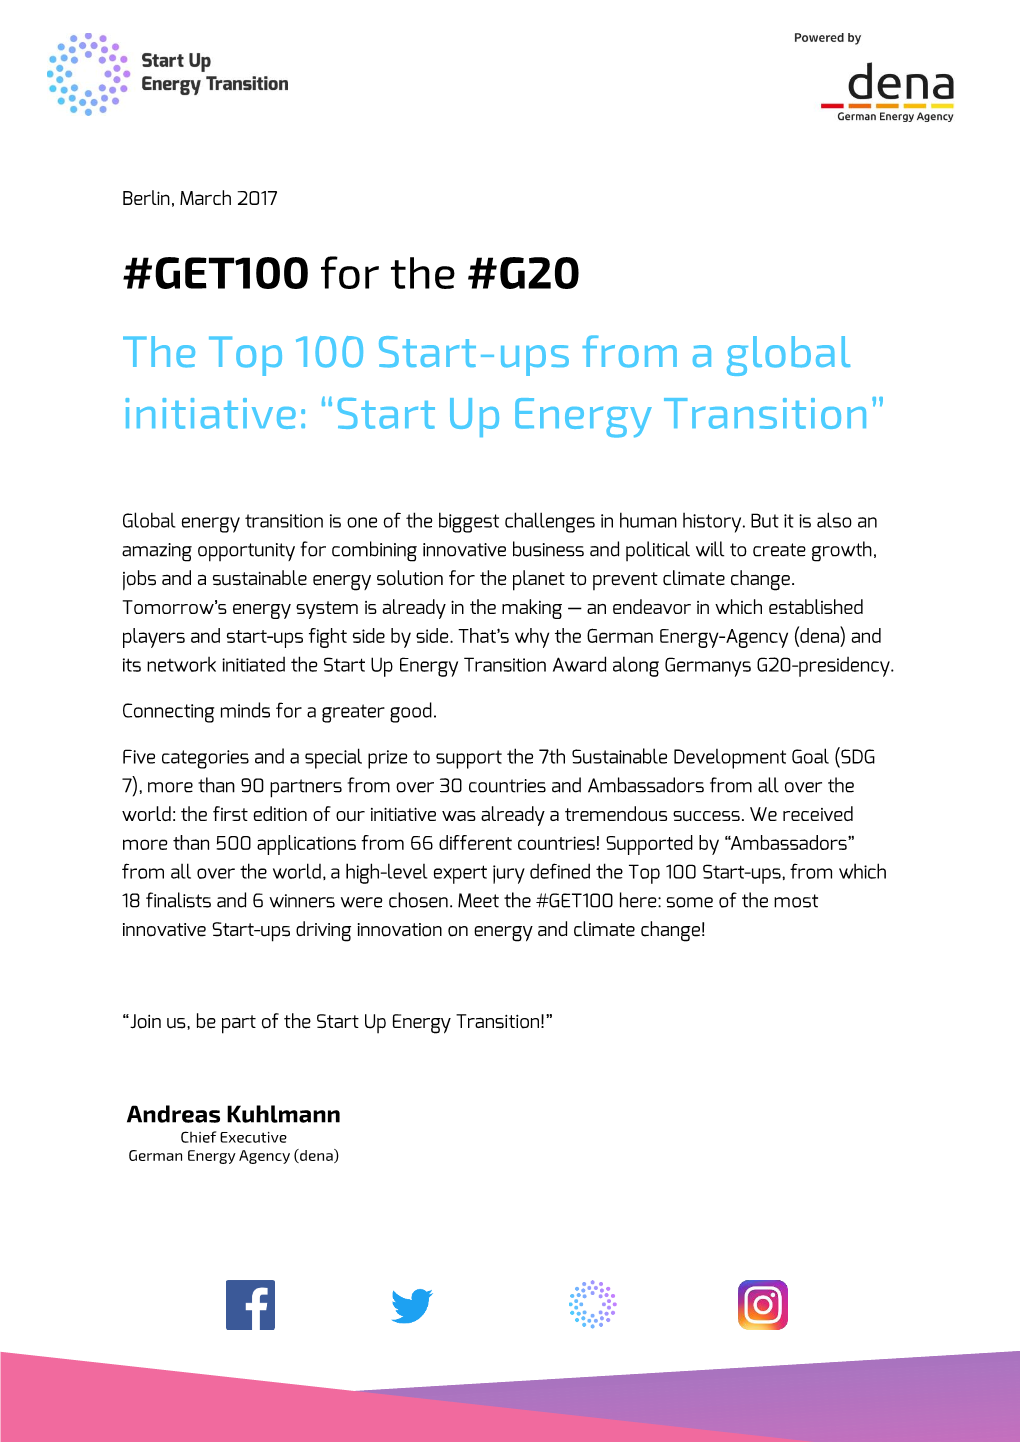 GET100 for the #G20 the Top 100 Start-Ups from a Global Initiative: “Start up Energy Transition”